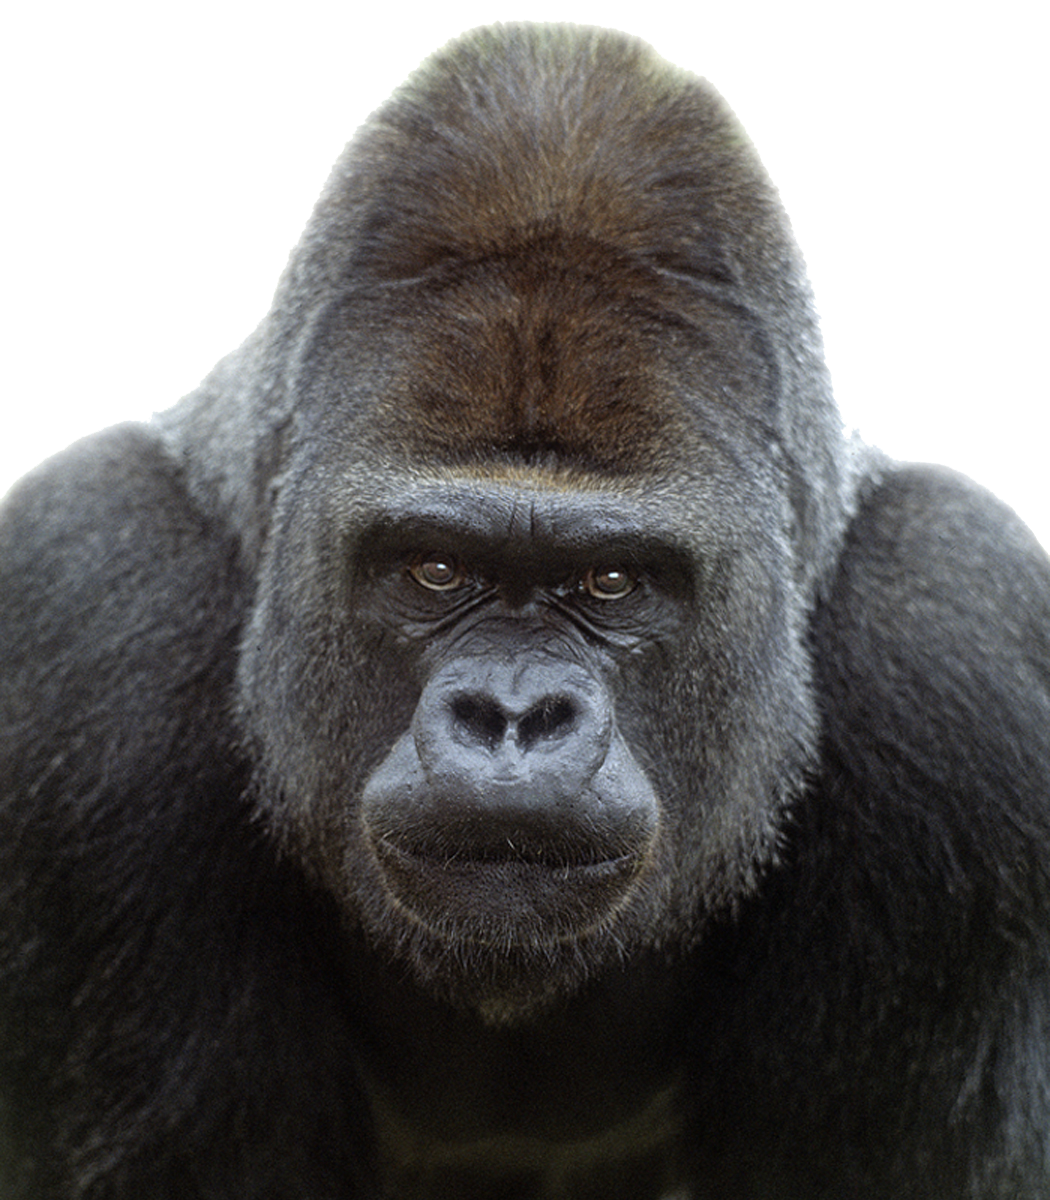 ndroid gorilla images